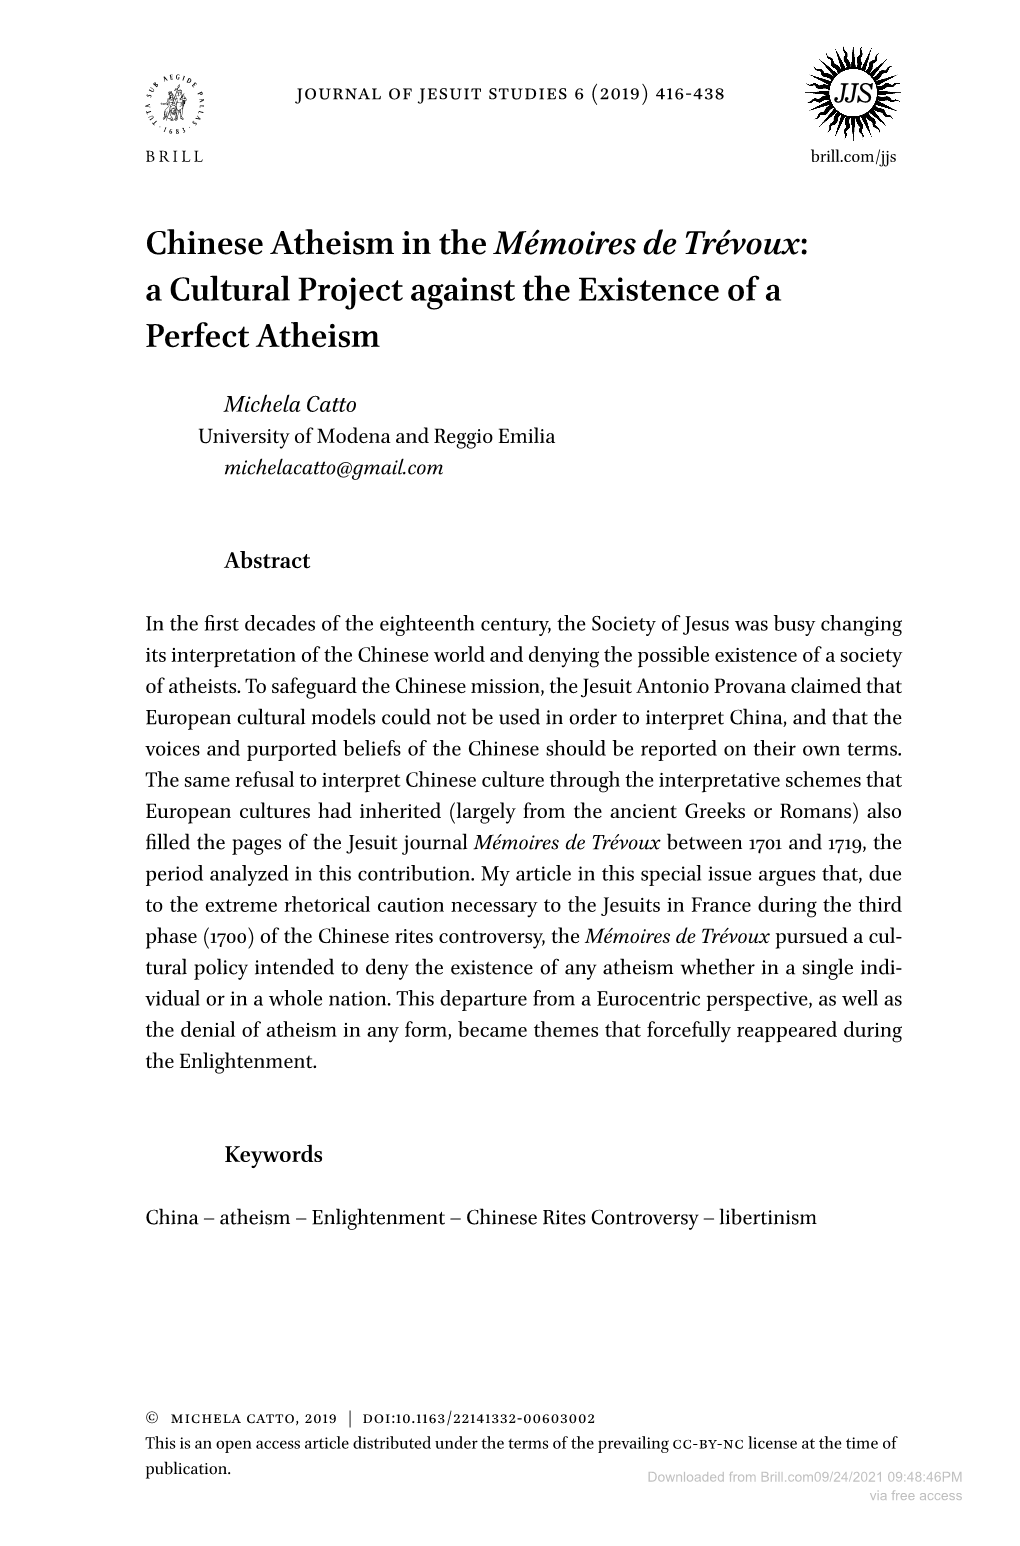 Chinese Atheism in the Mémoires De Trévoux: a Cultural Project Against the Existence of a Perfect Atheism